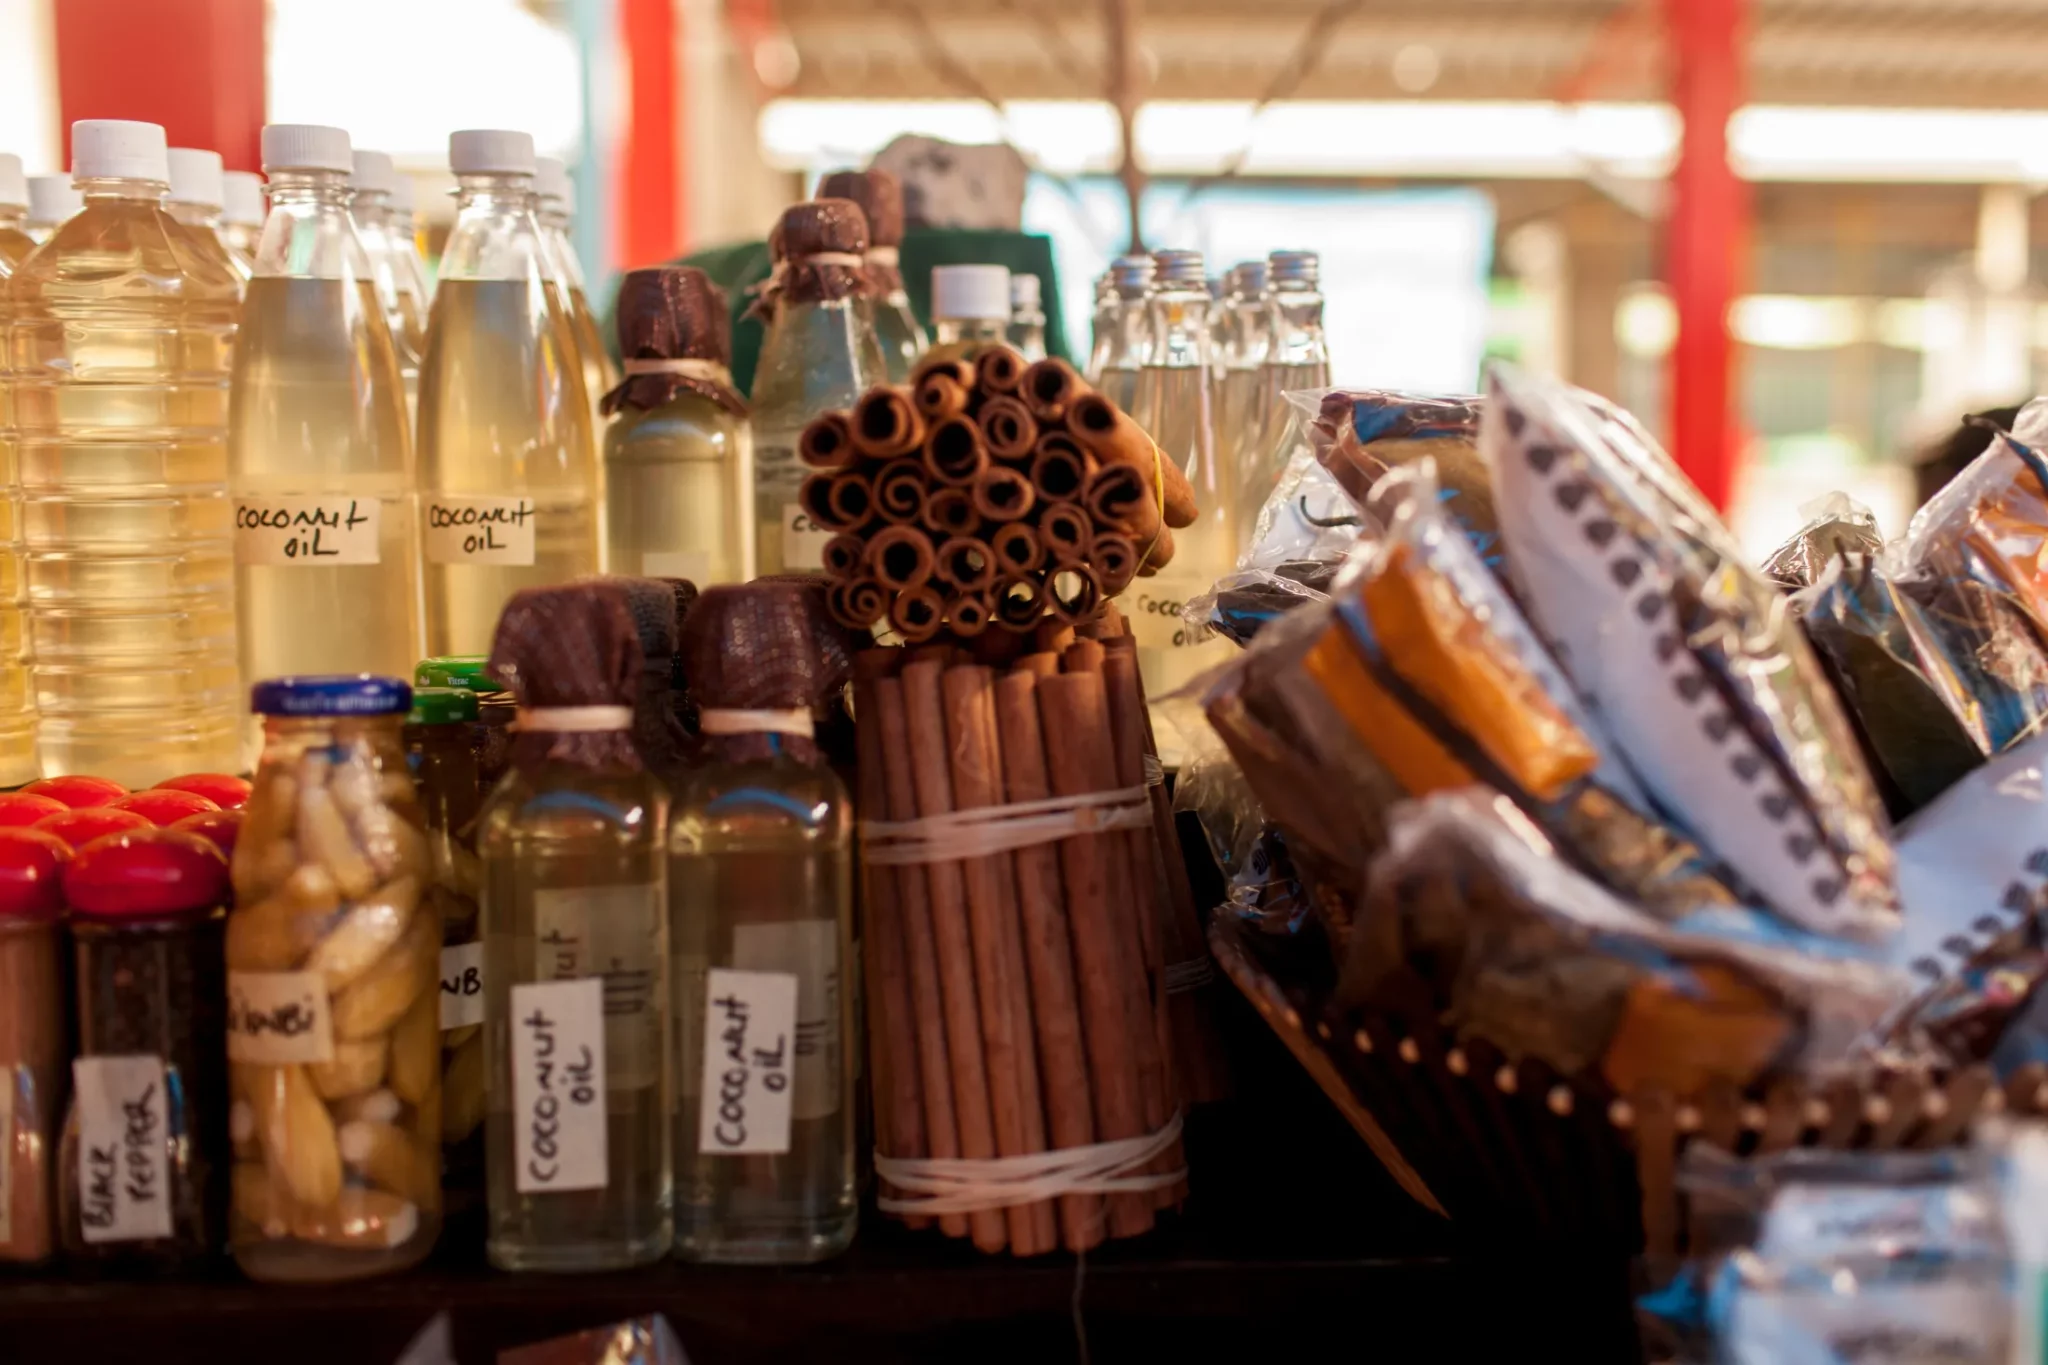 A variety of local Seychelles products on display at a Seychelles market, including bottles of coconut oil and bundles of cinnamon sticks.